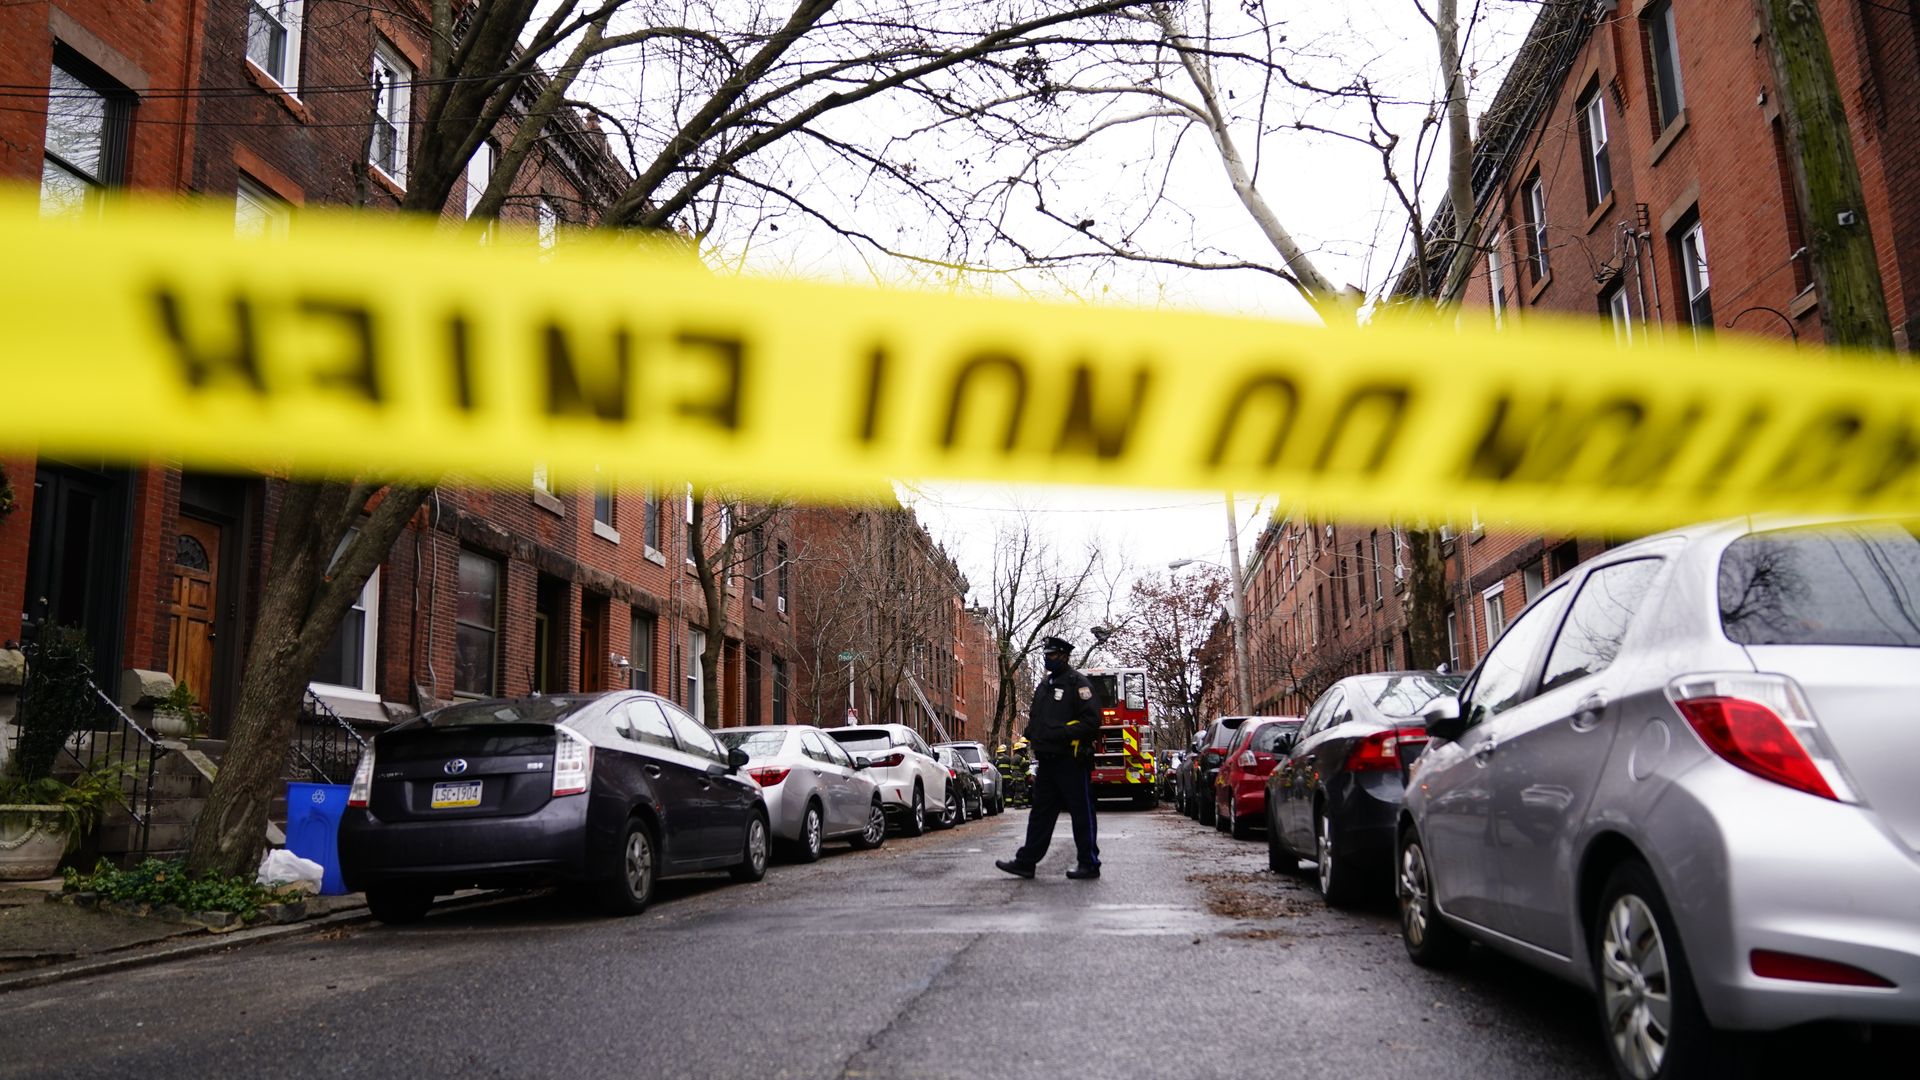 A police officer stands in focus behind an out-of-focus caption tape in Philadelphia's Fairmount neighborhood.